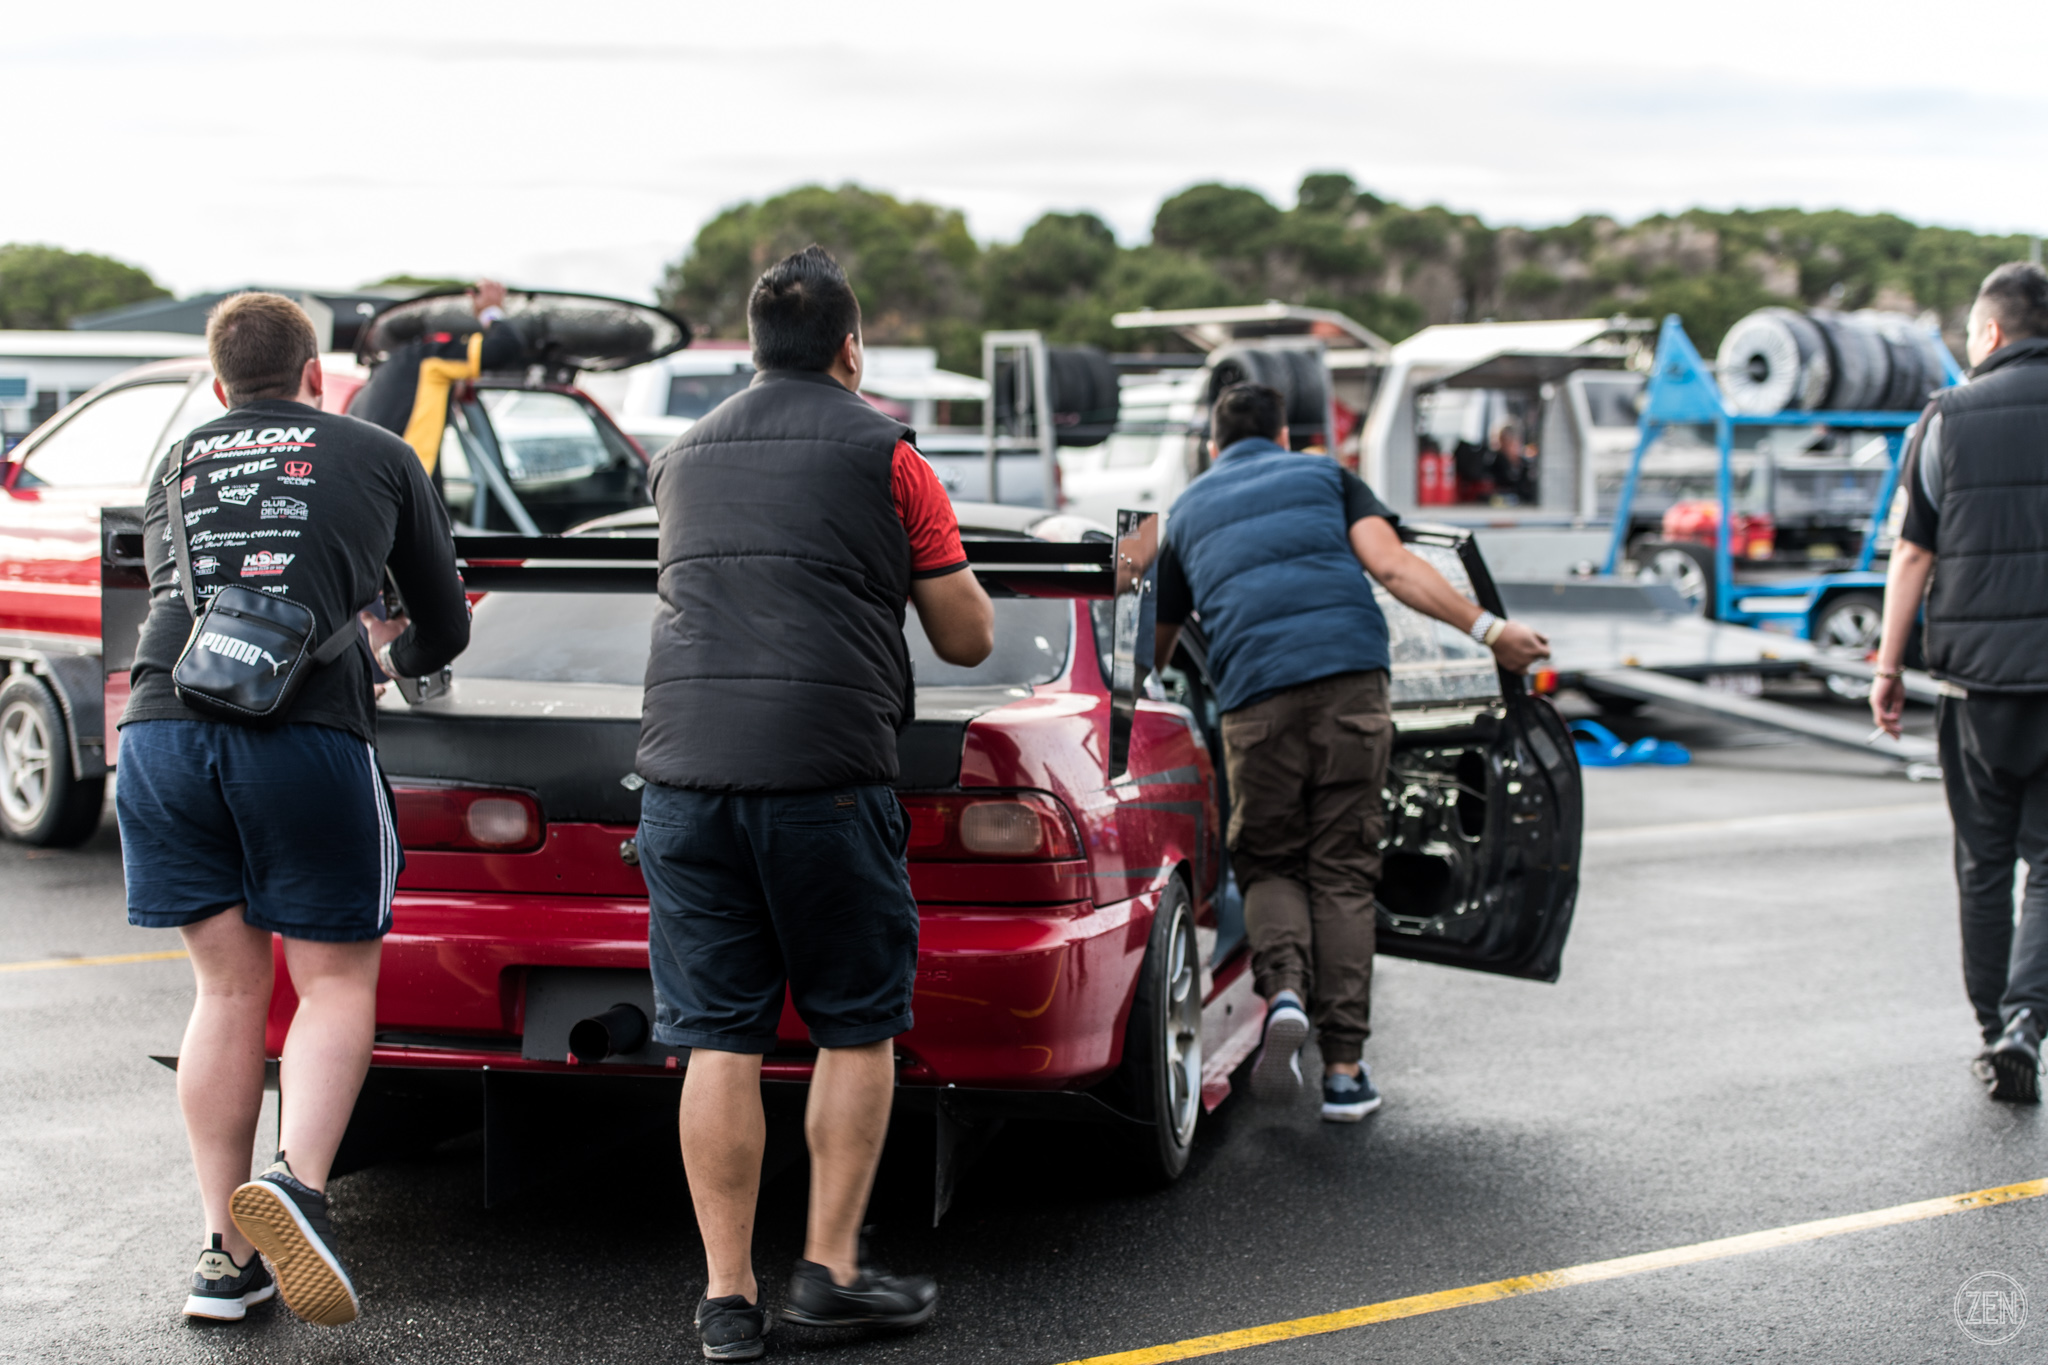 2018-04-06 - Vic Time Attack 017